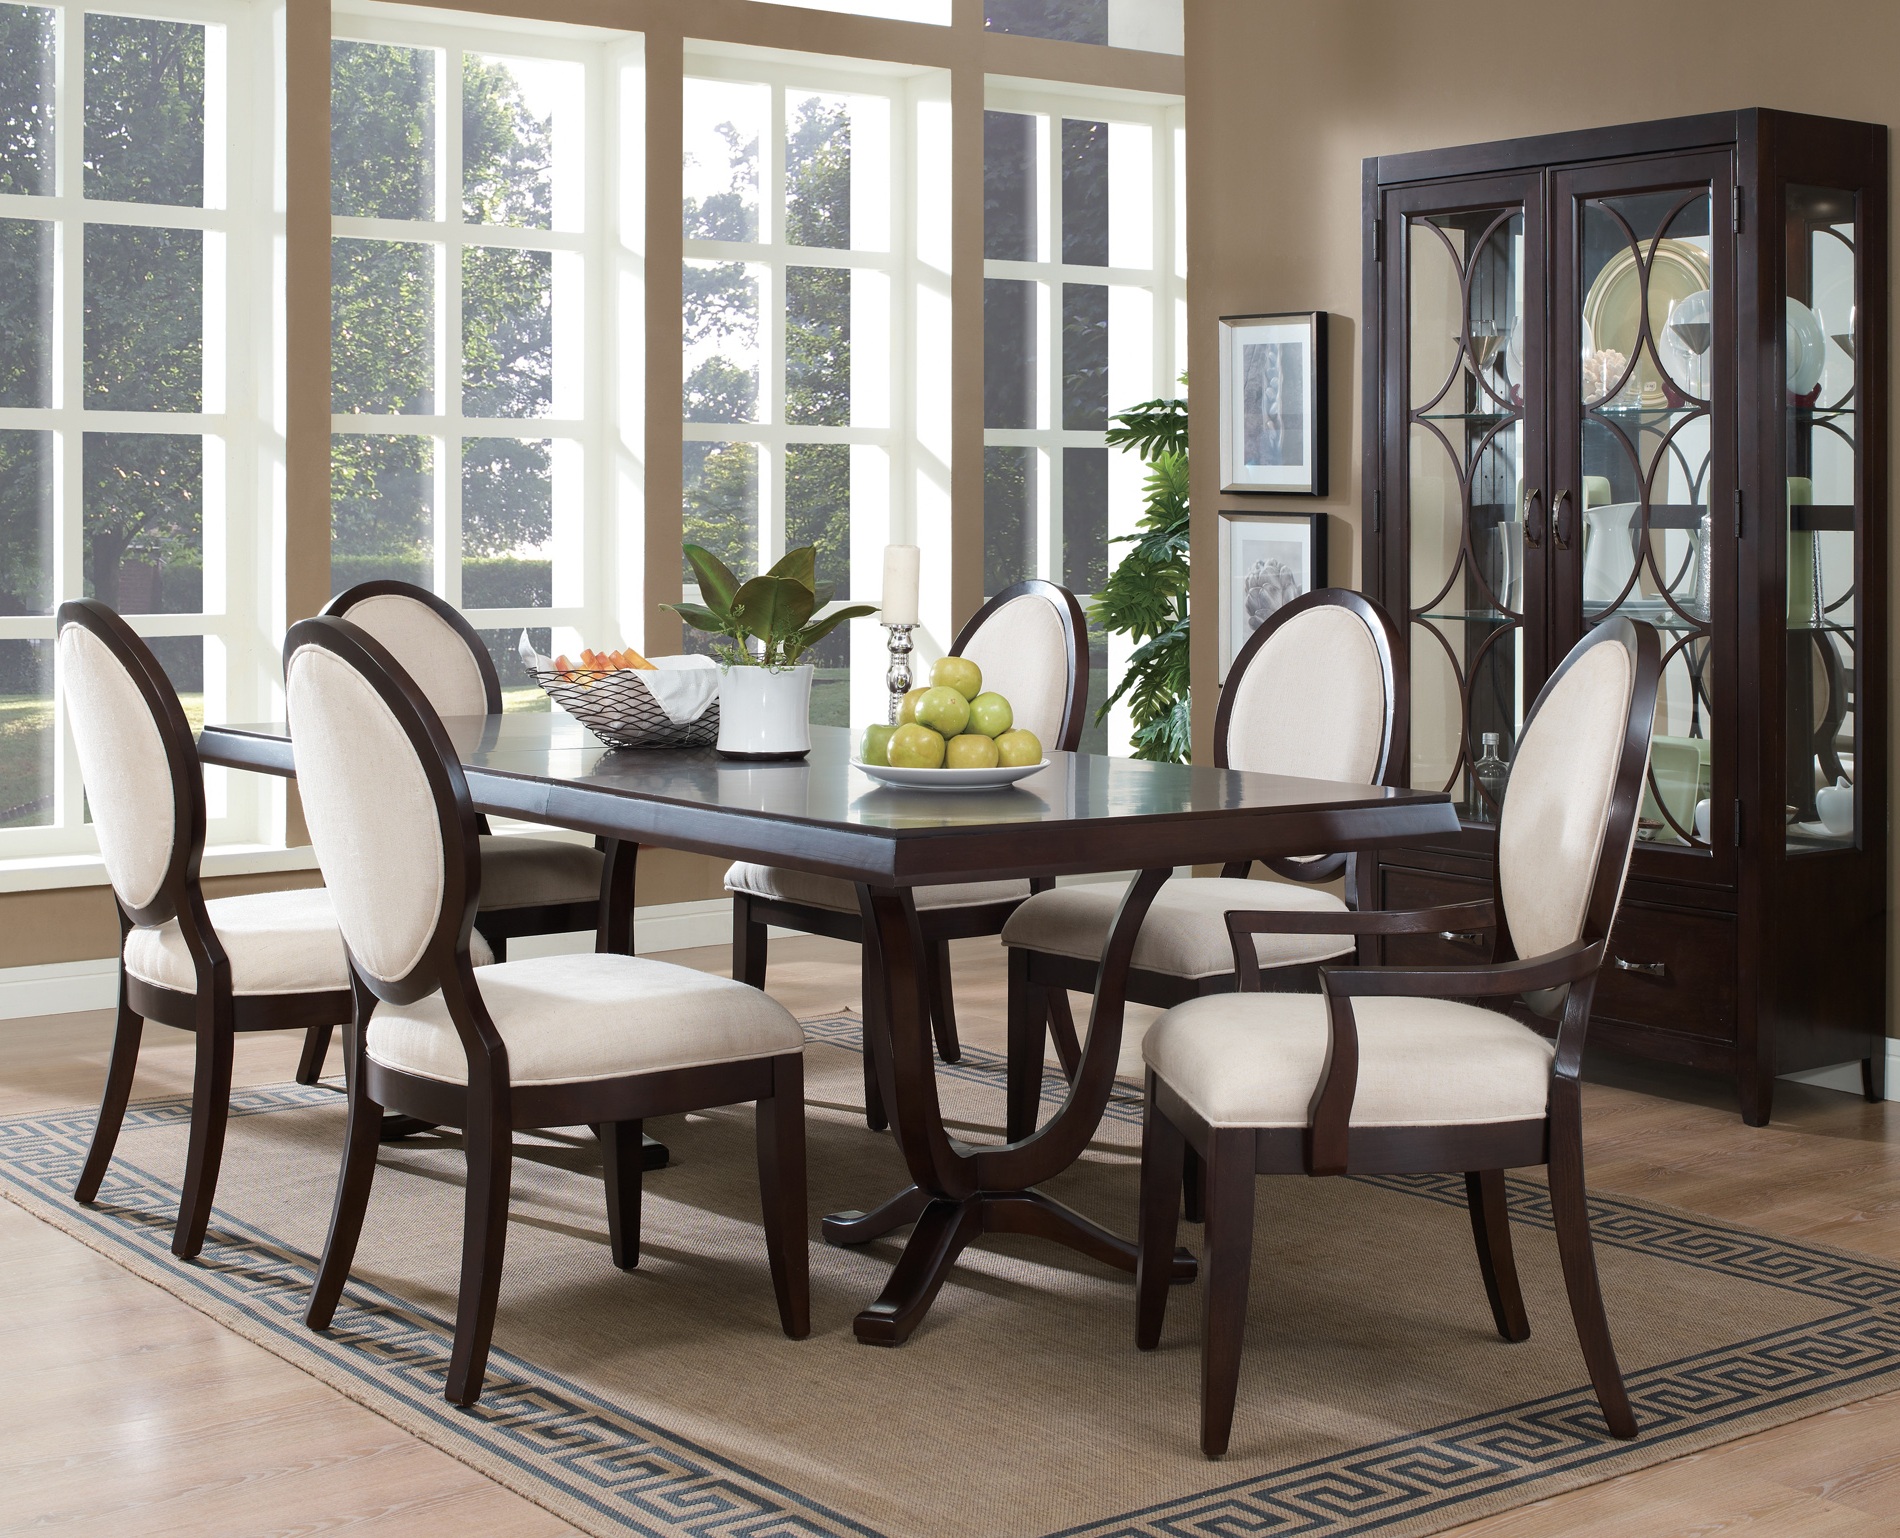 modern classic dining room sets photo - 3